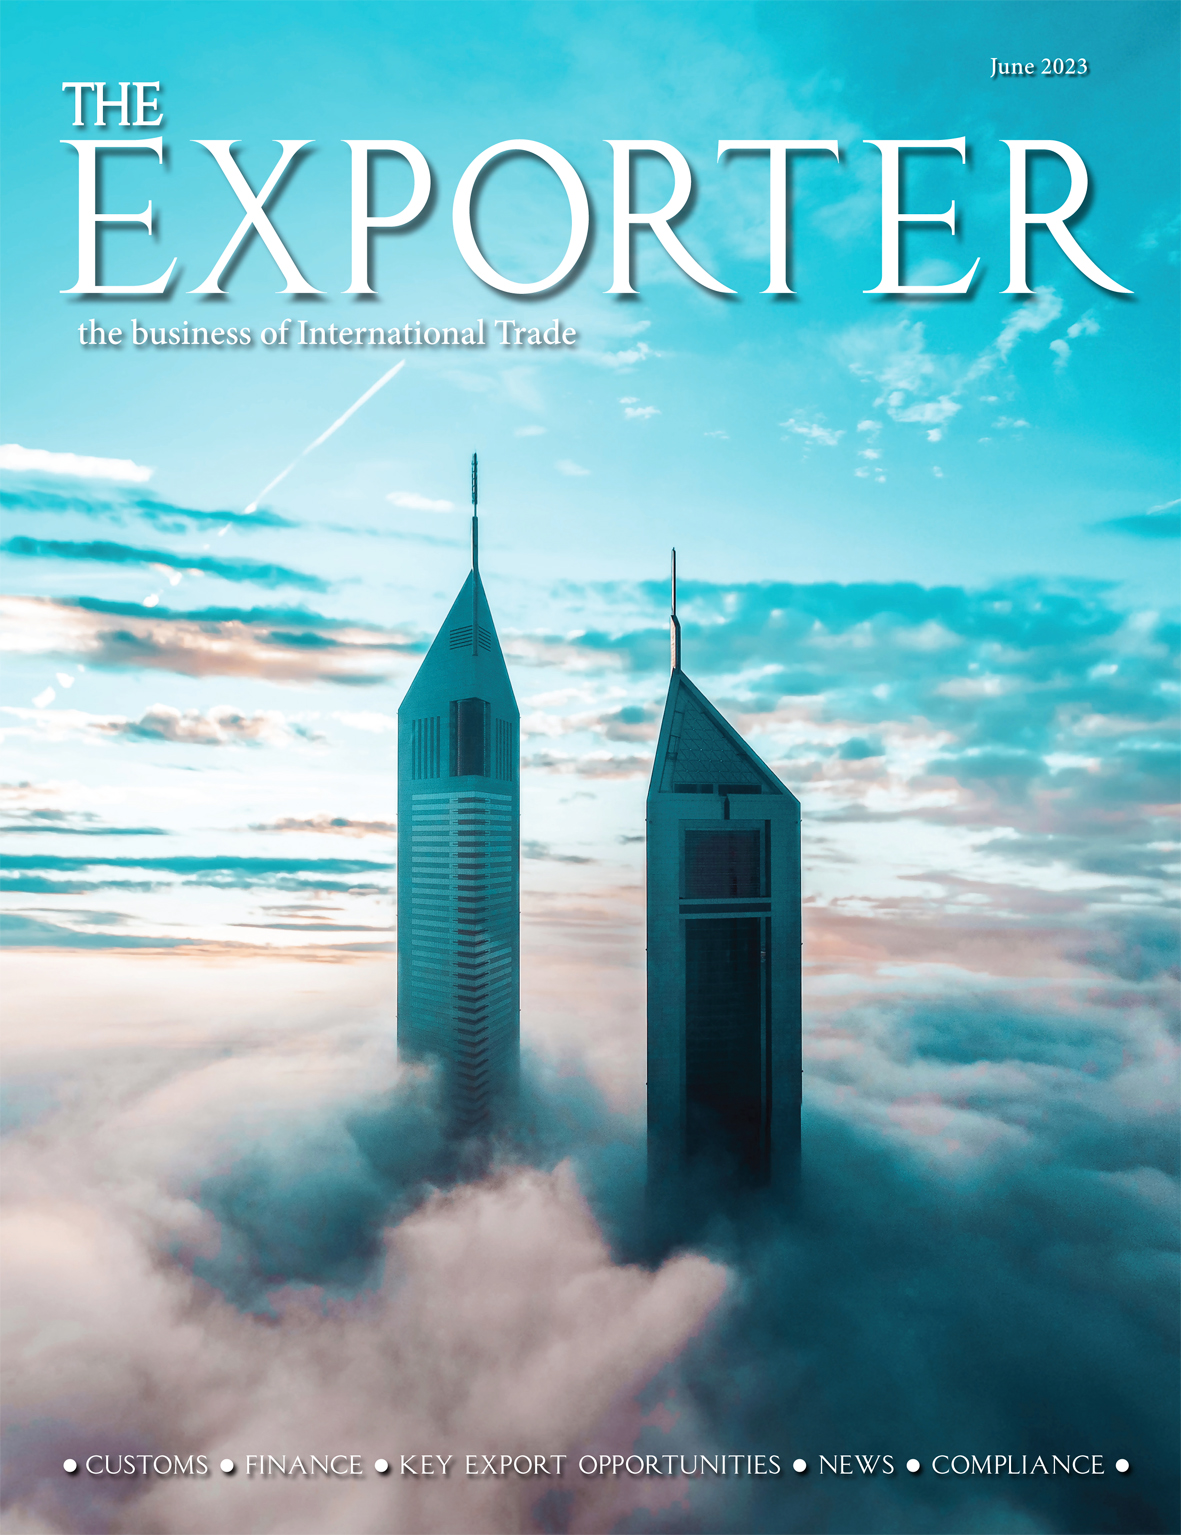 The Exporter